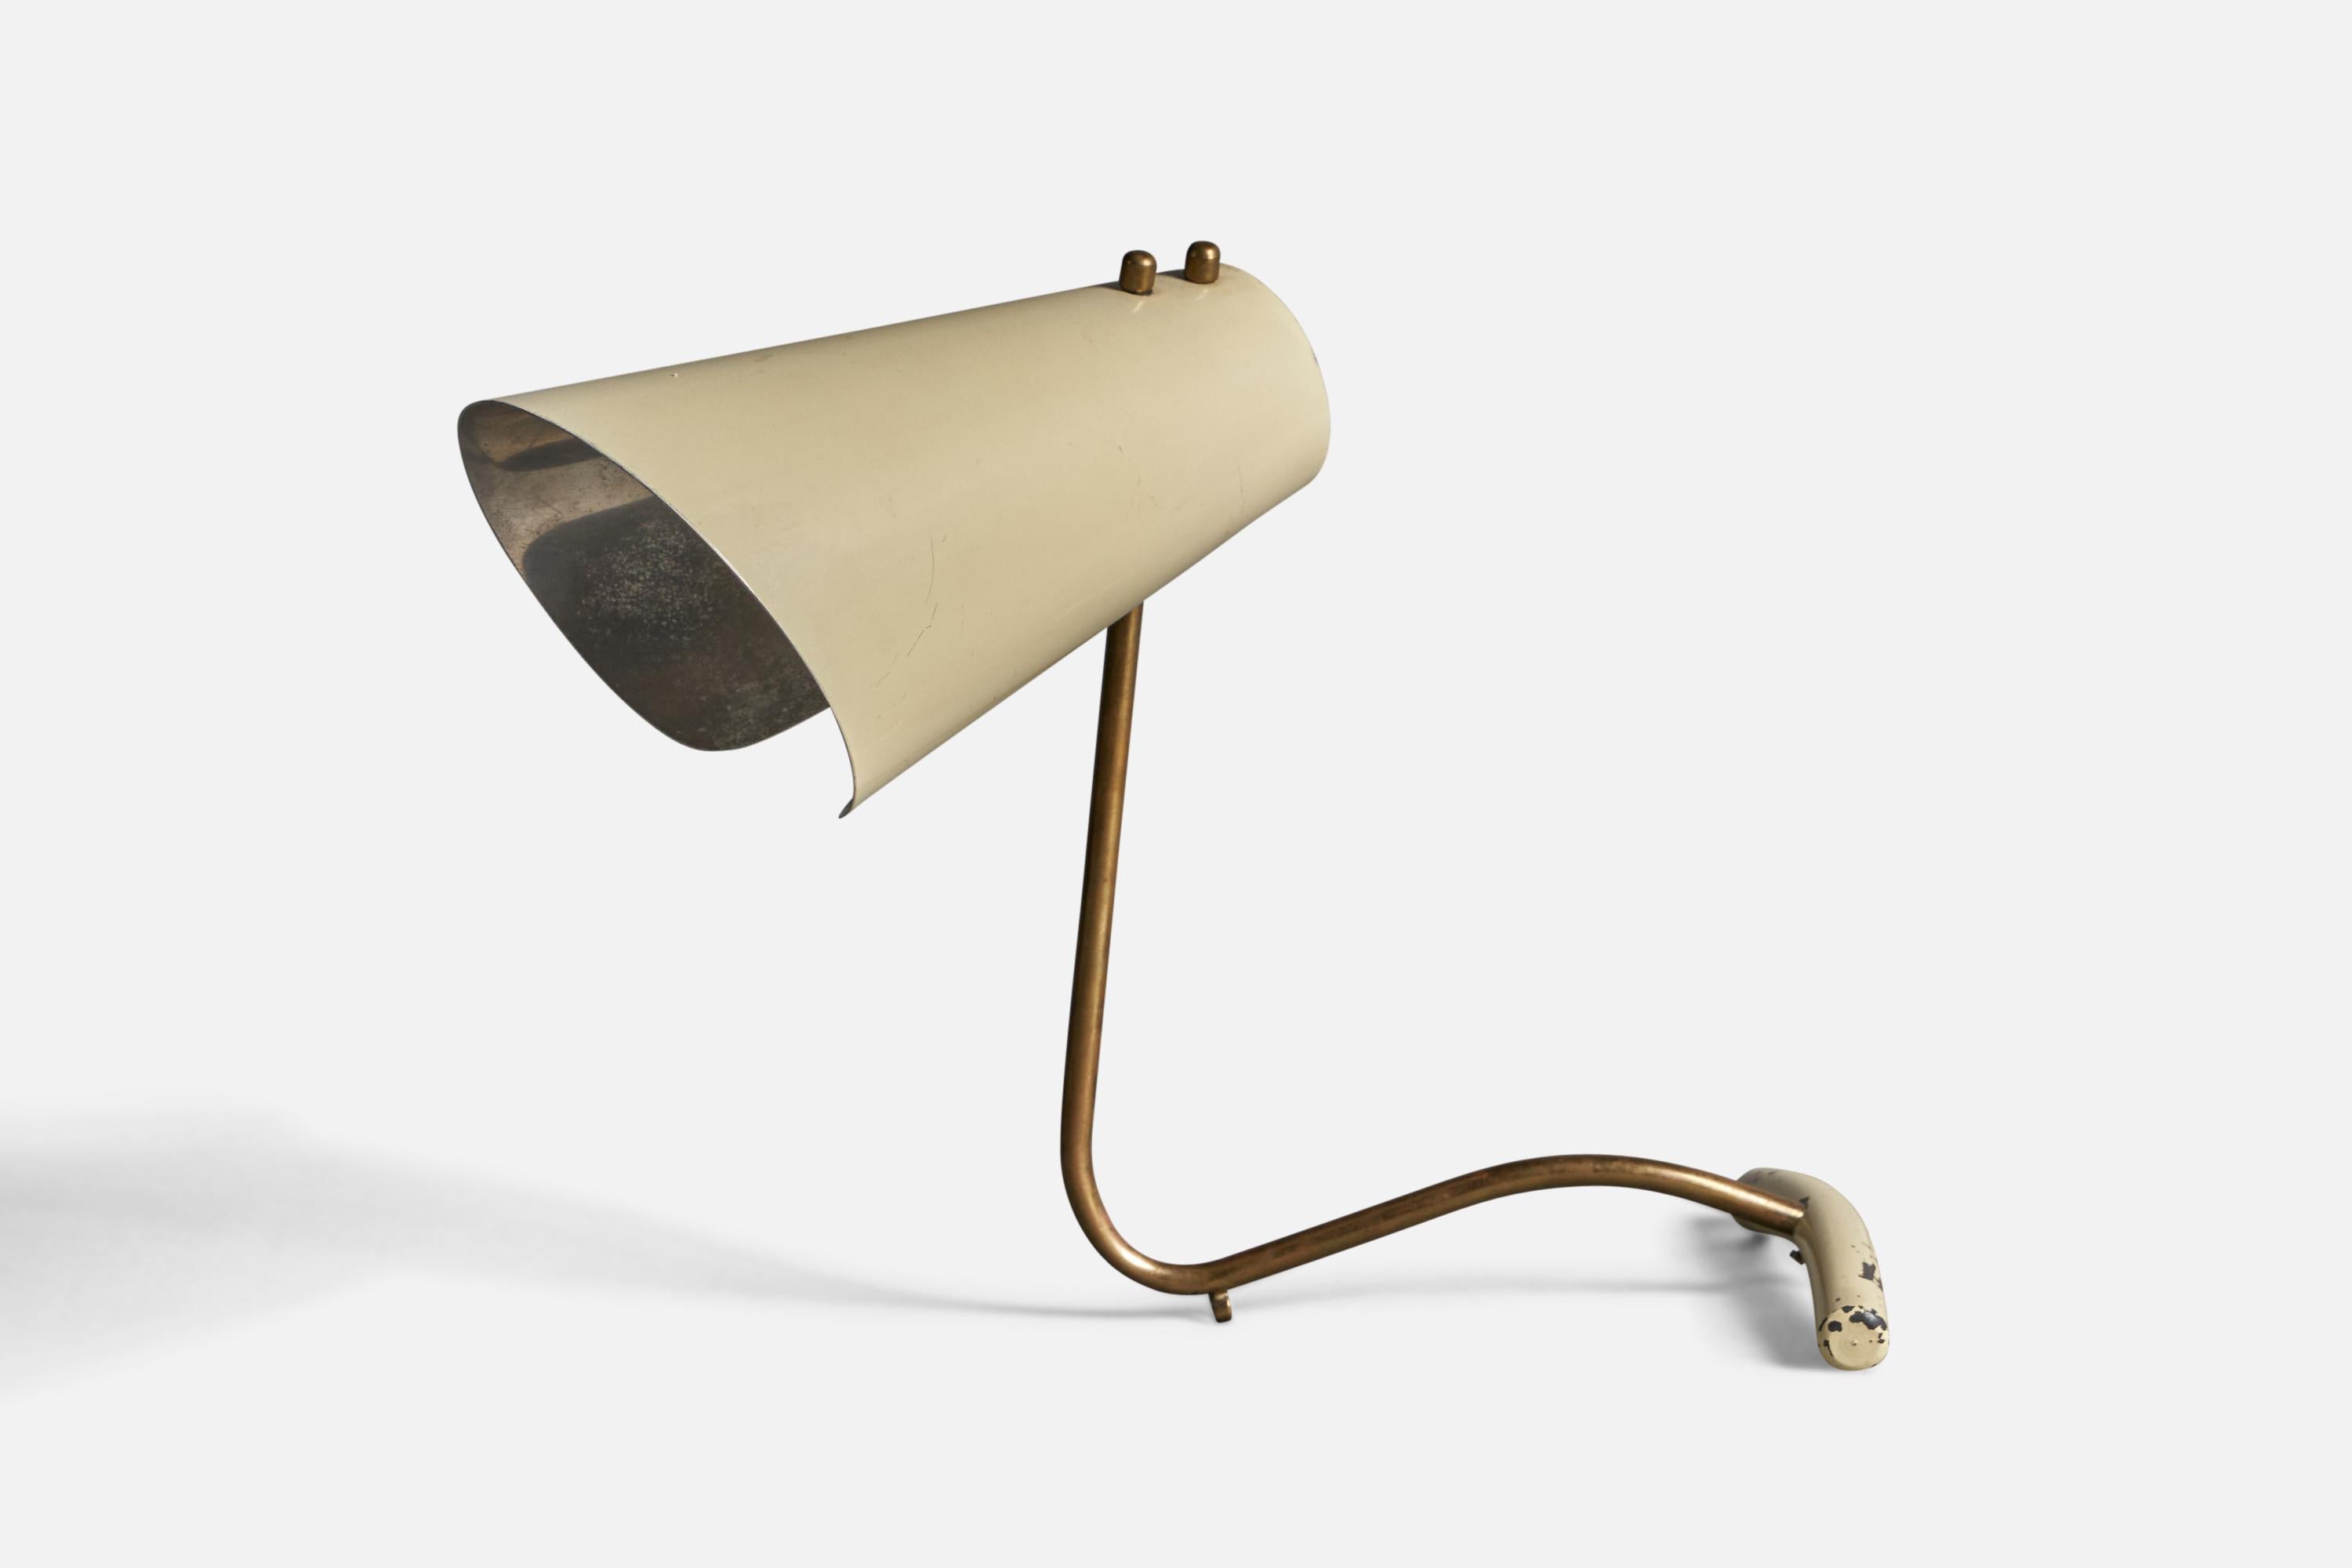 An adjustable brass and beige metal table lamp, Finland, 1940s.

Overall Dimensions (inches): 12.5